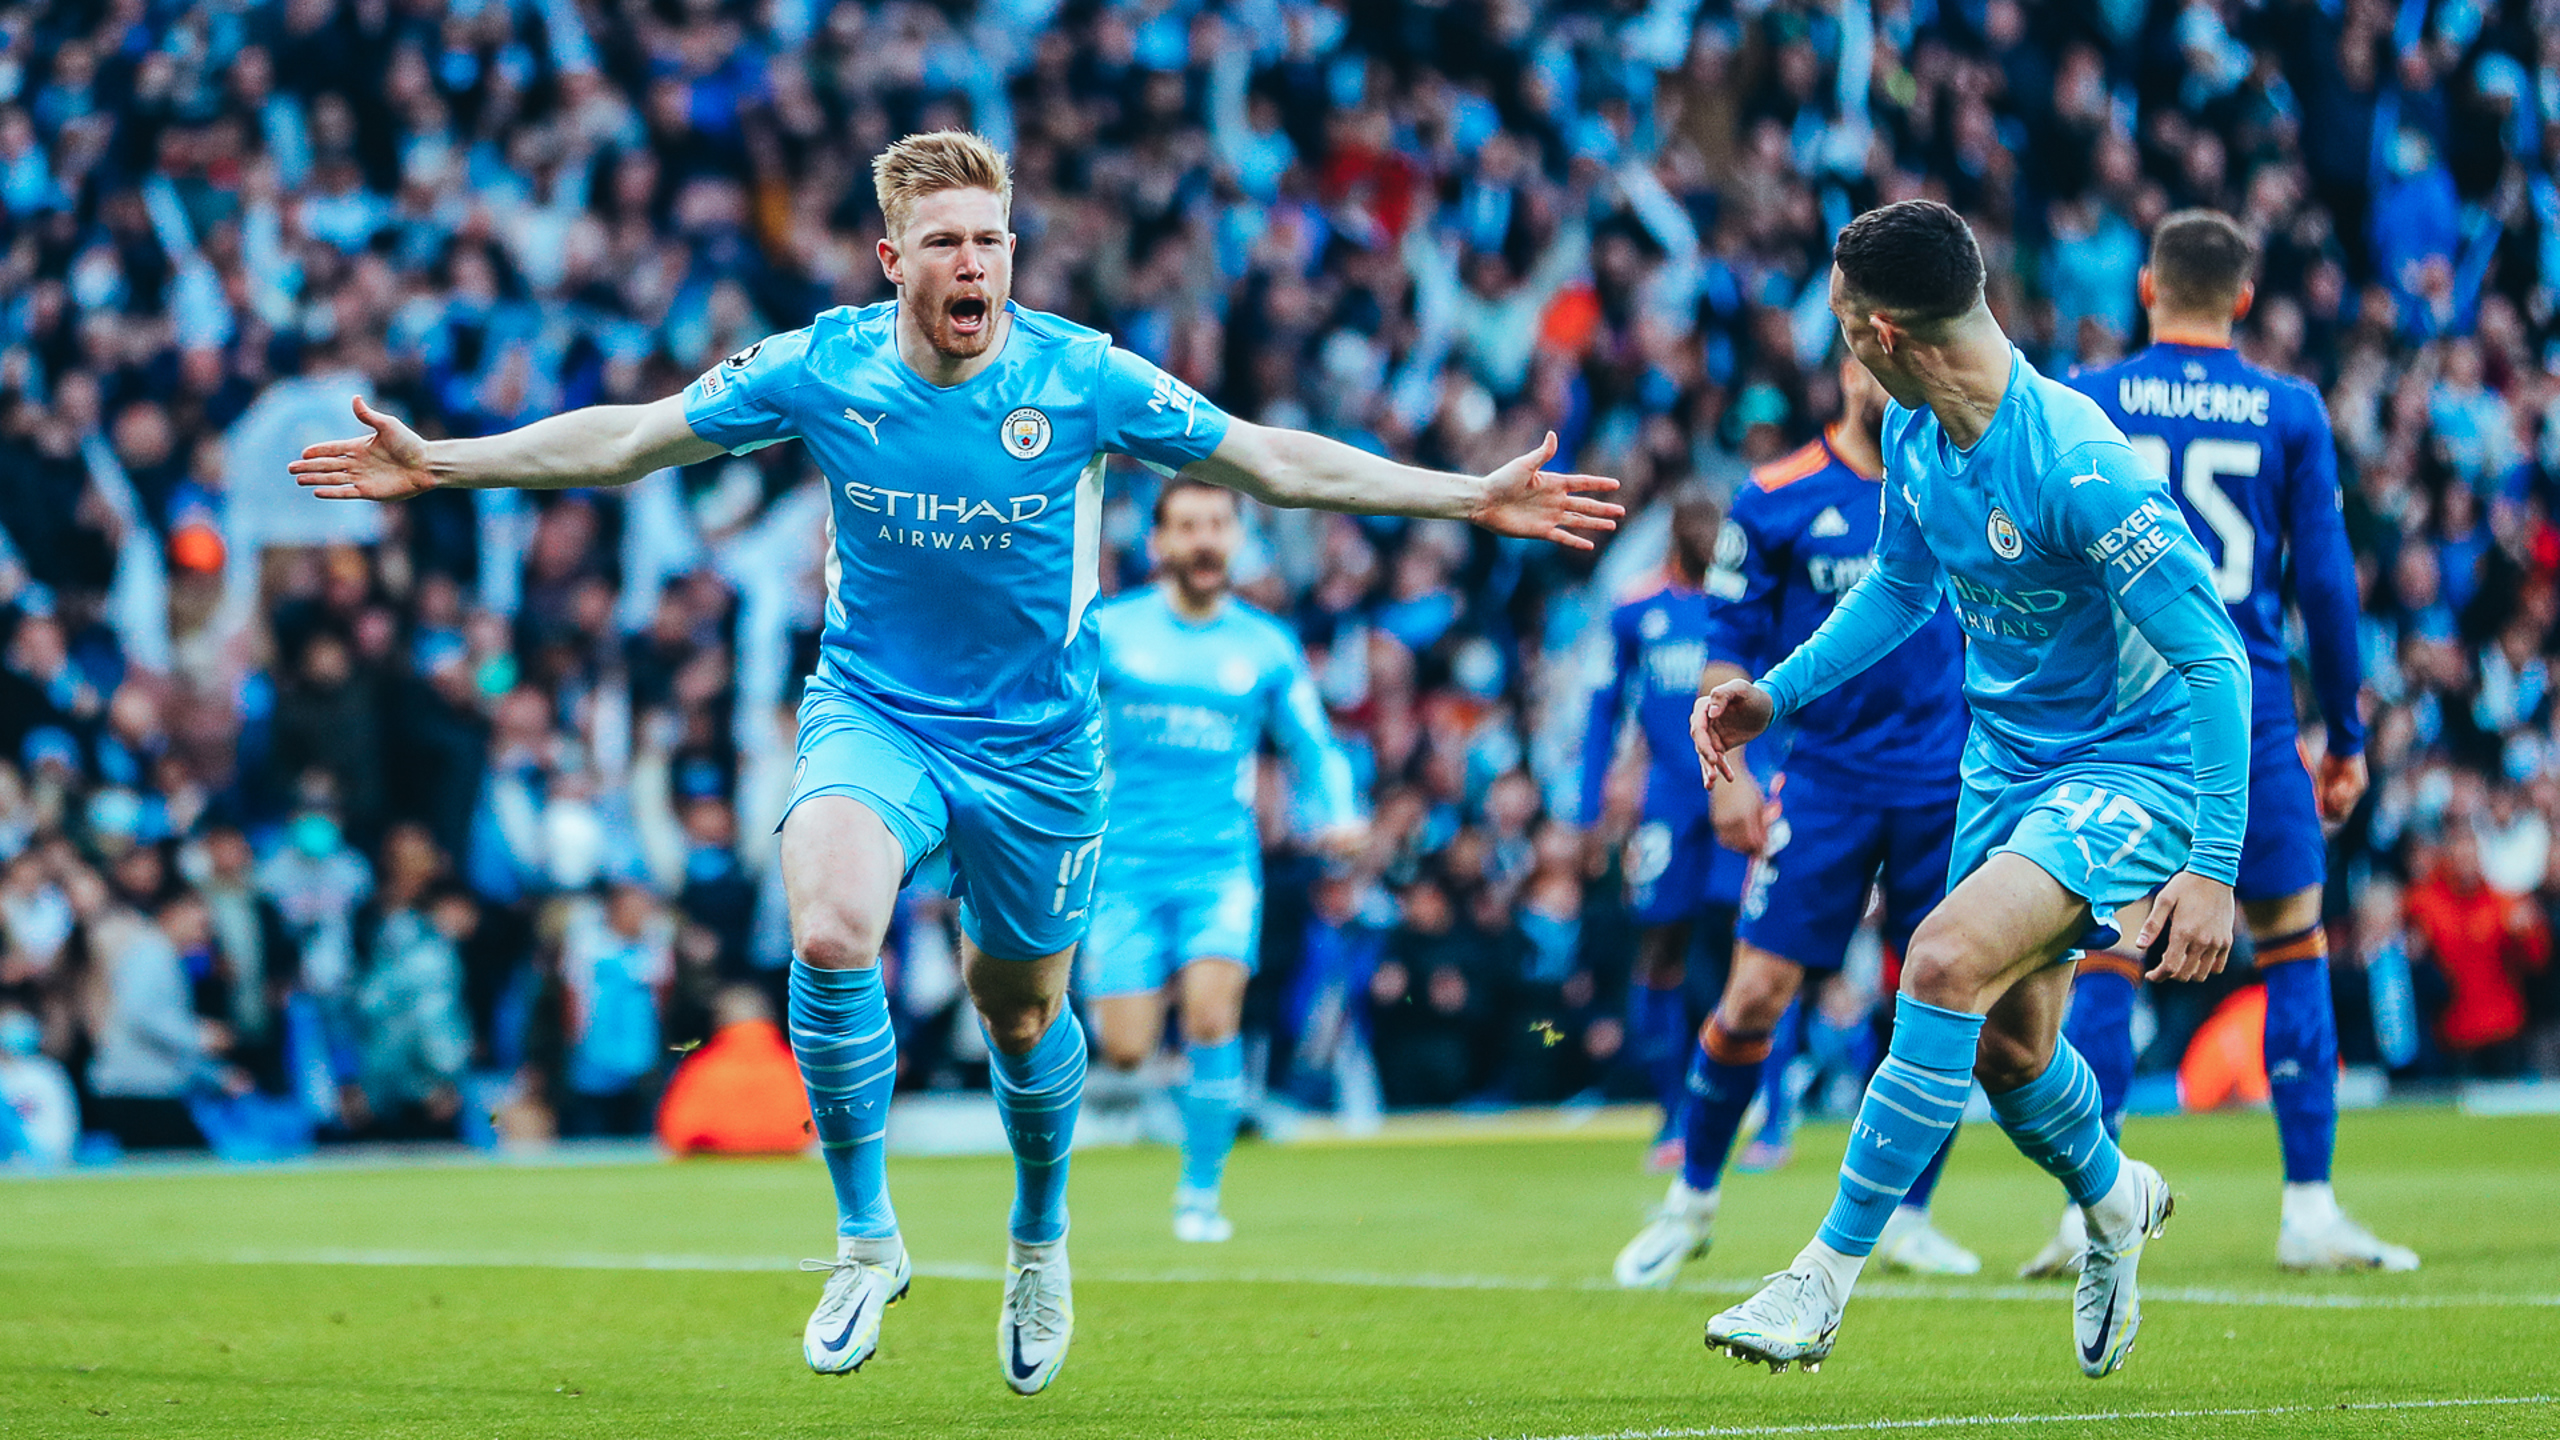 City edge seven-goal thriller in Champions League classic